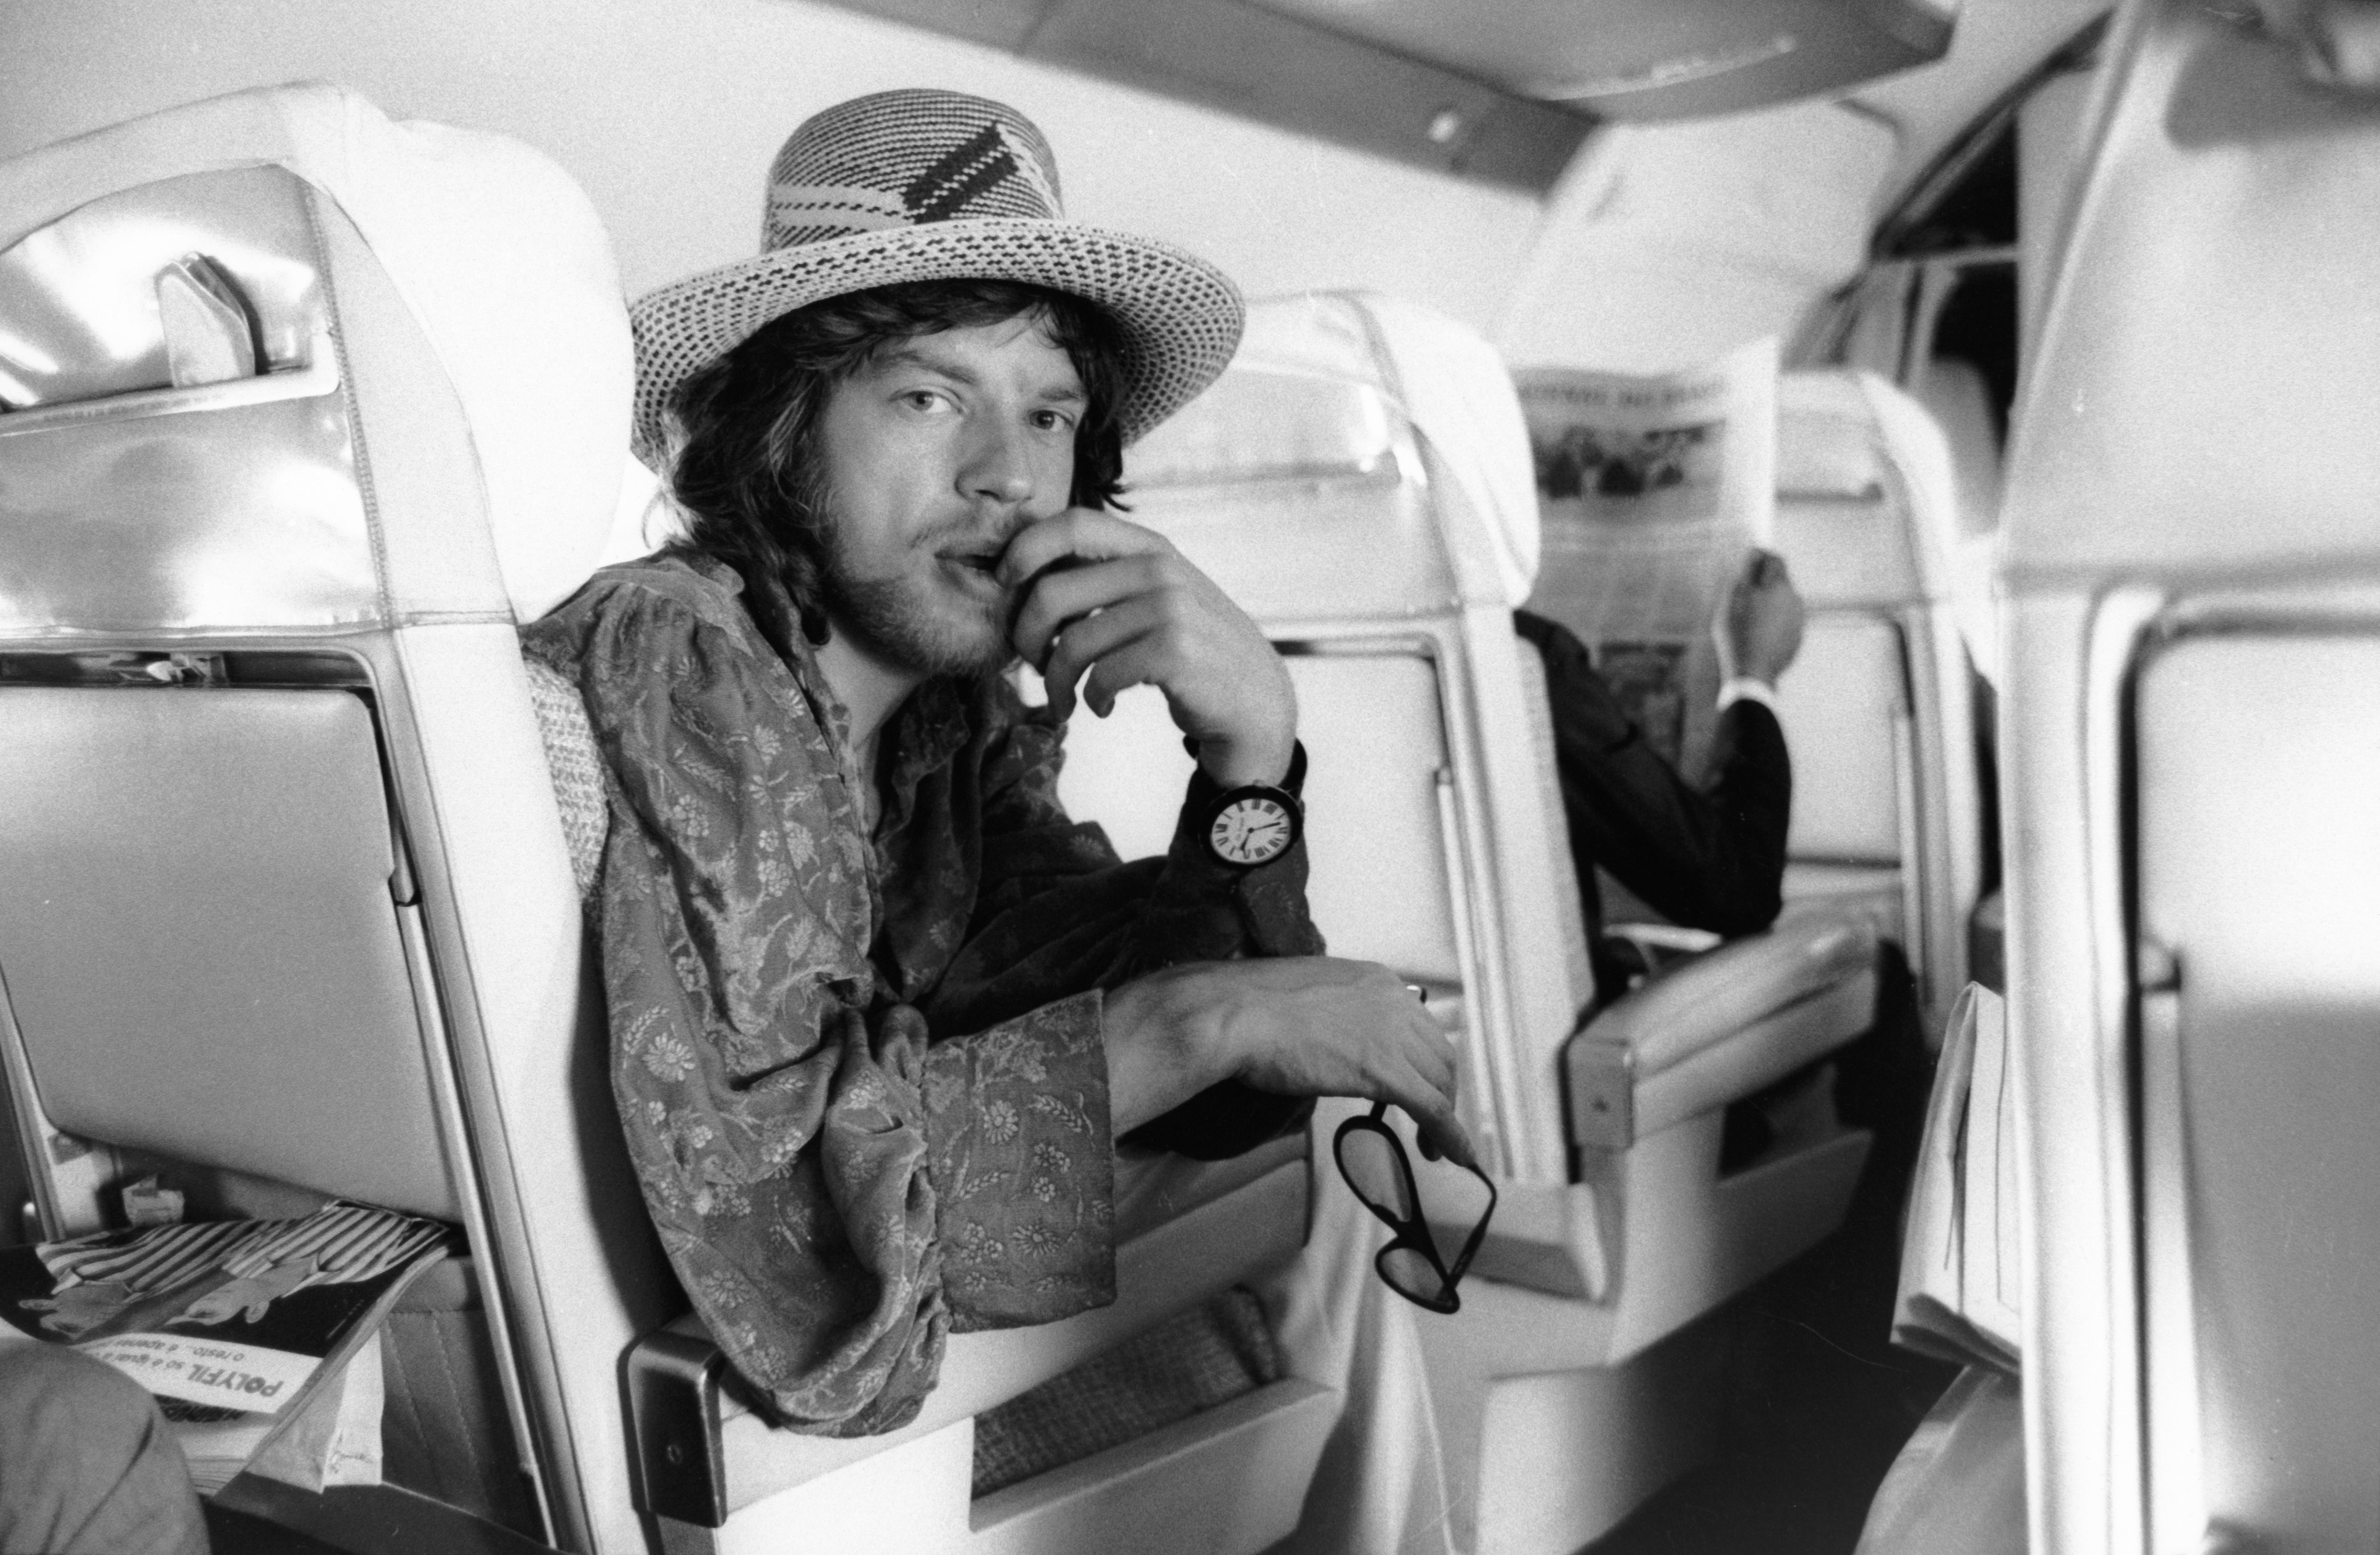 Mick Jagger wearing a hat